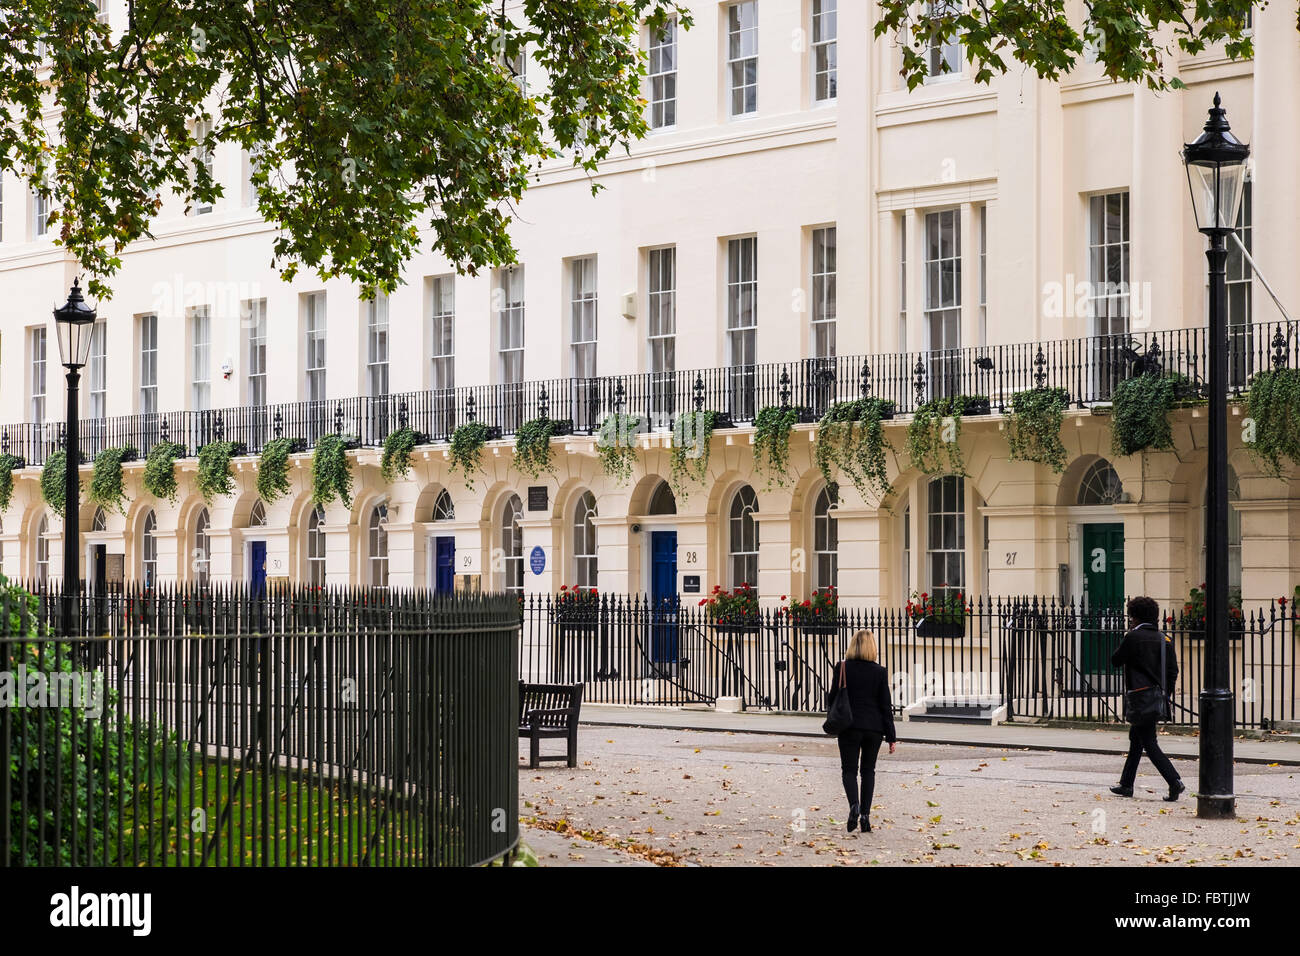 Fitzroy Square, Londres, Angleterre, Royaume-Uni Banque D'Images